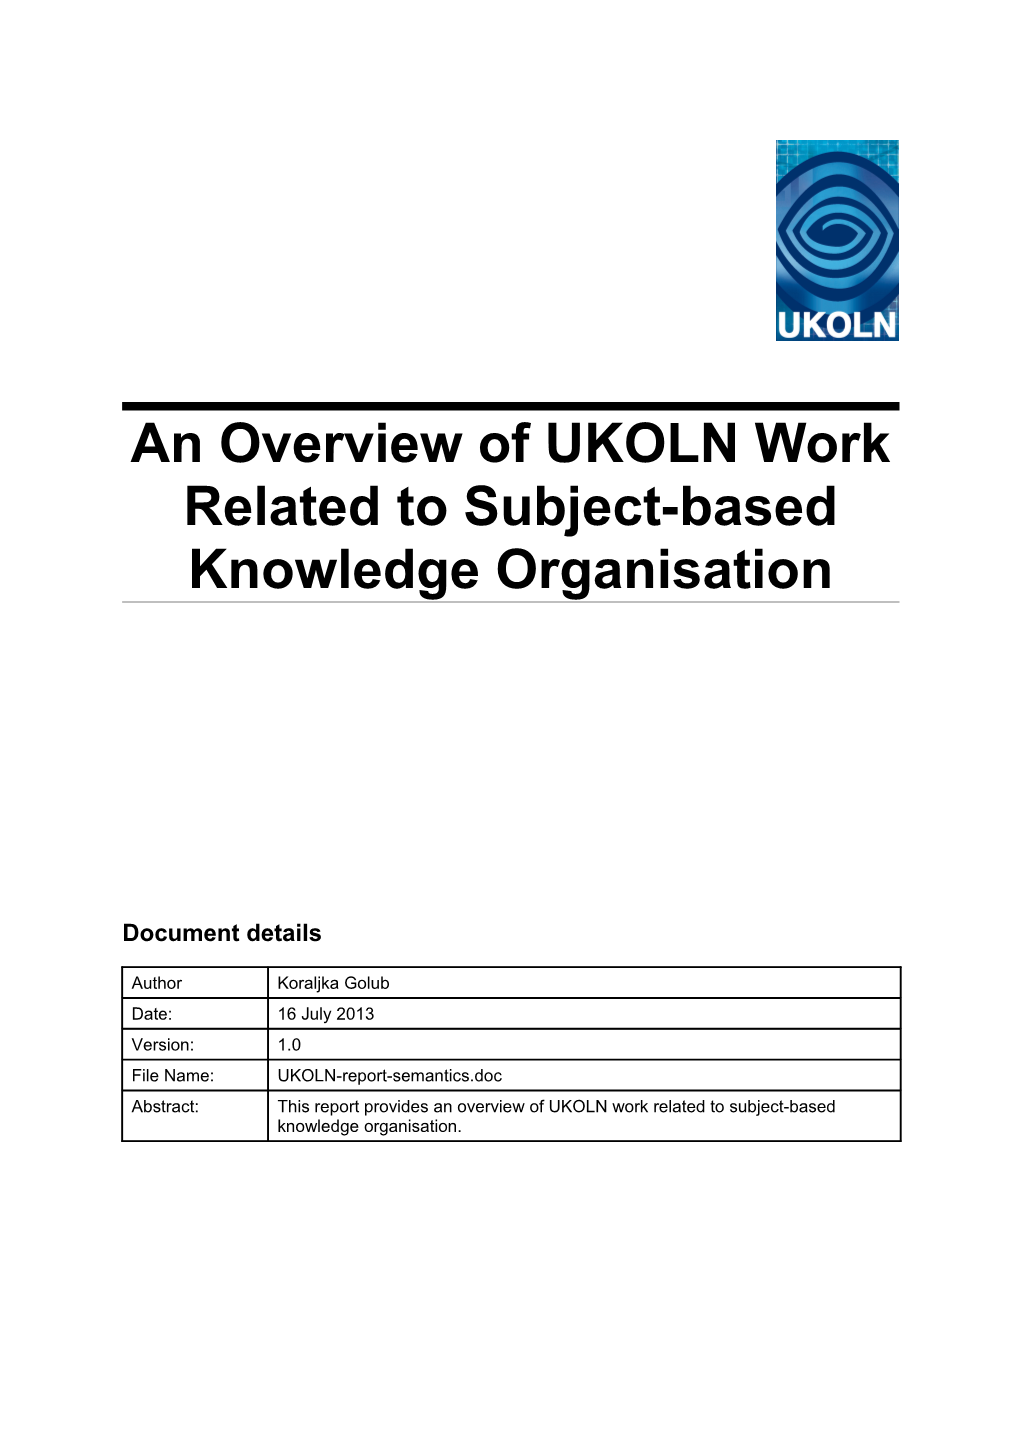 An Overview of UKOLN Work Related to Subject-Based Knowledge Organisation